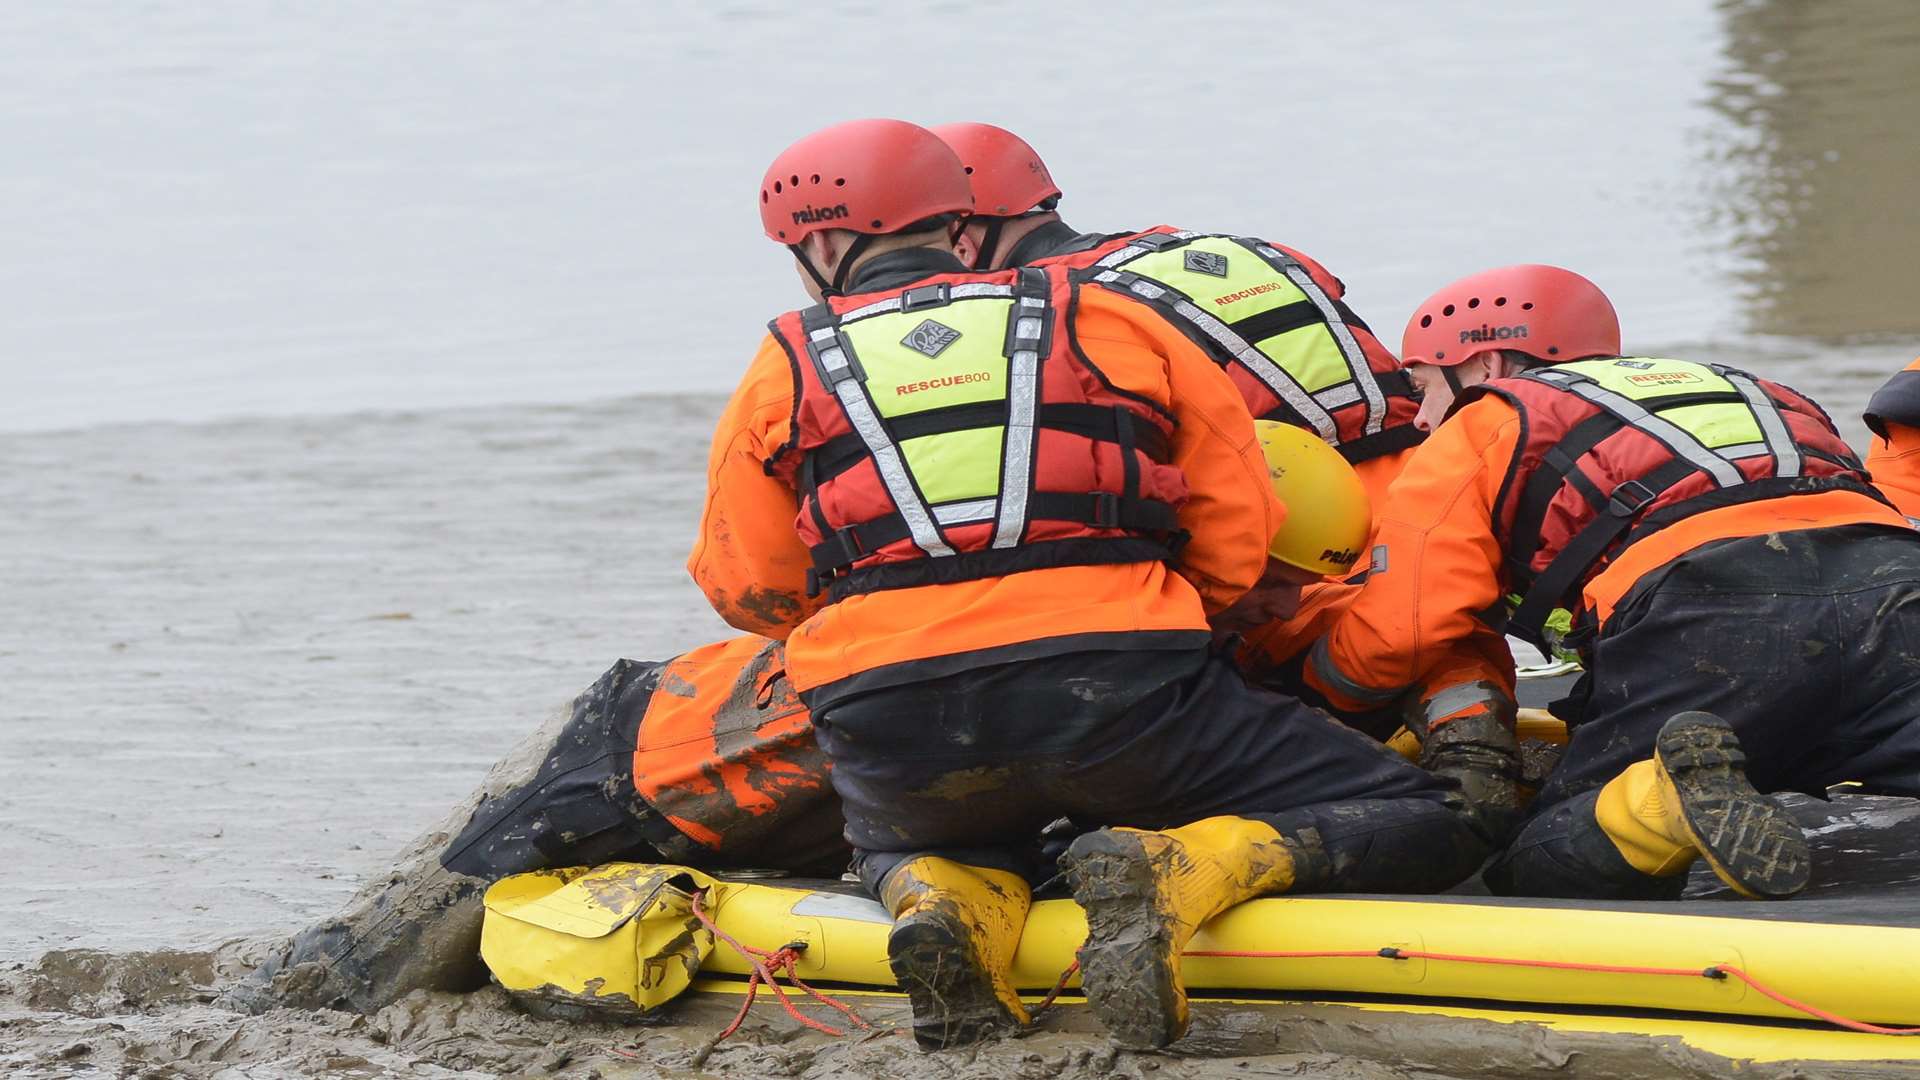 The firefighters use floats to reach people stranded.